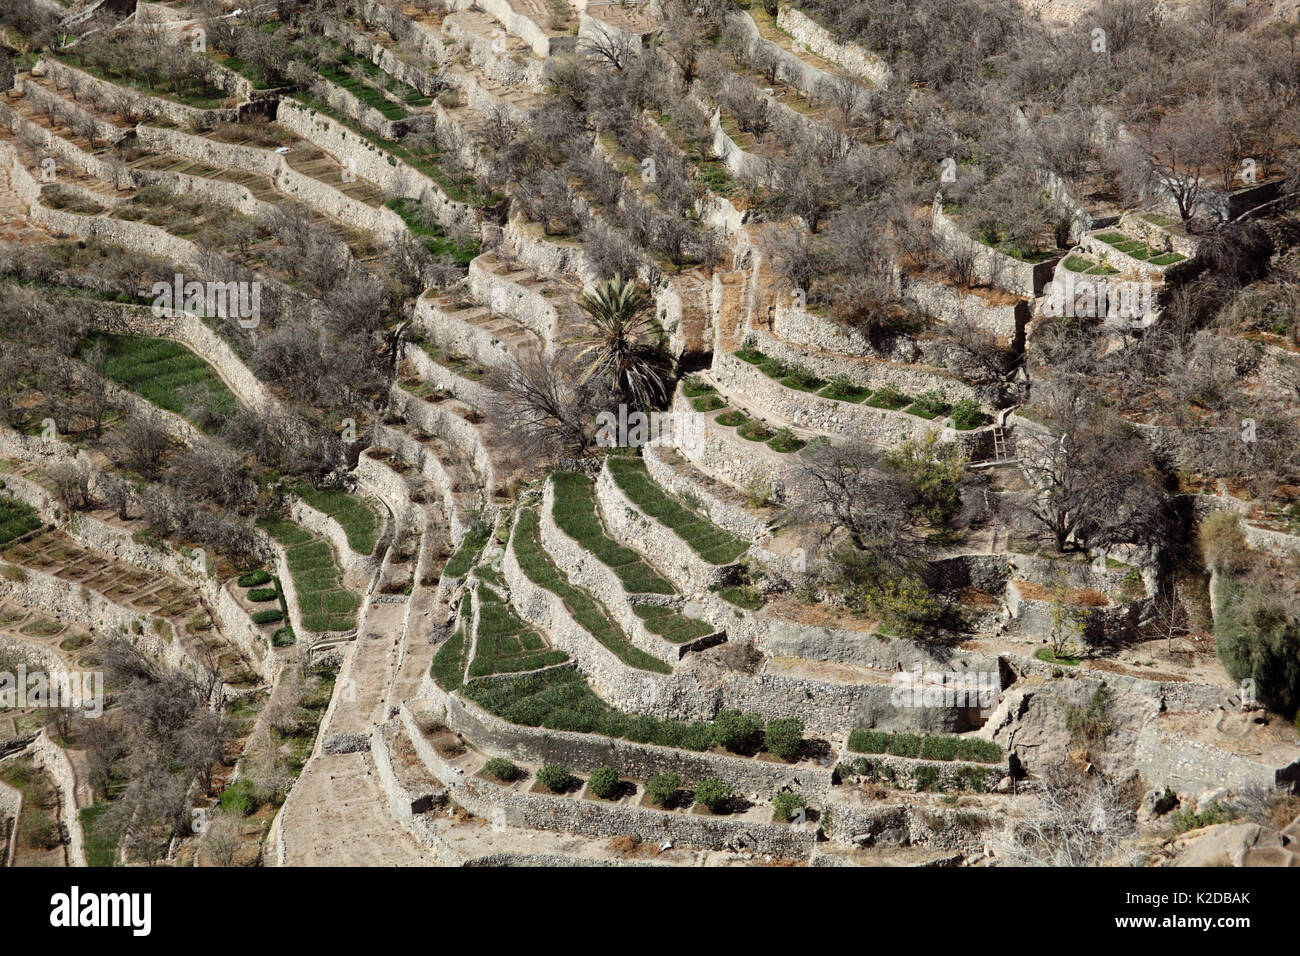 Terraced fields with rose gardens, a popular tourist site in the mourntains, Oman, February Stock Photo